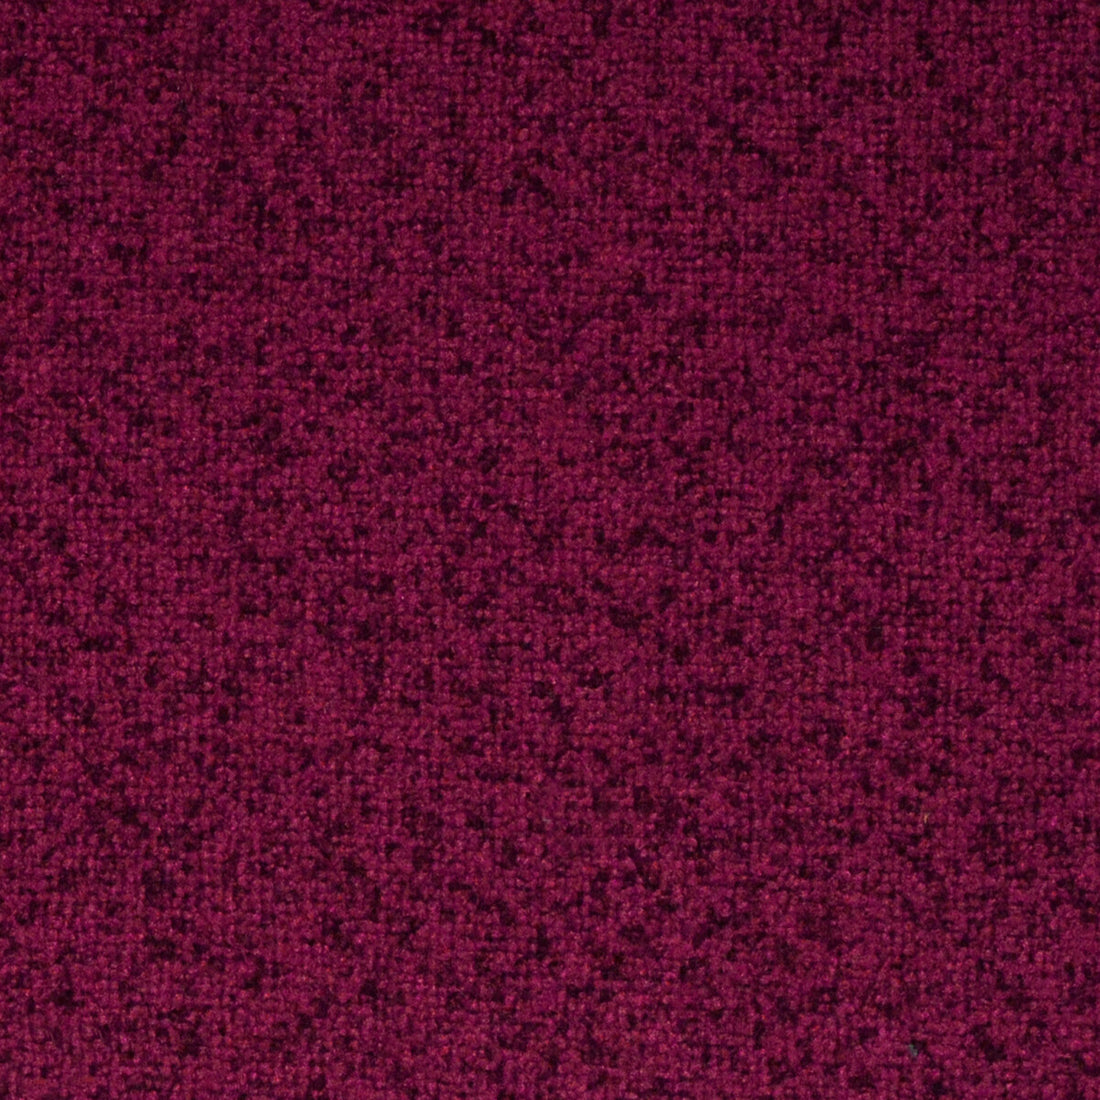 Kravet Contract fabric in 35181-9 color - pattern 35181.9.0 - by Kravet Contract